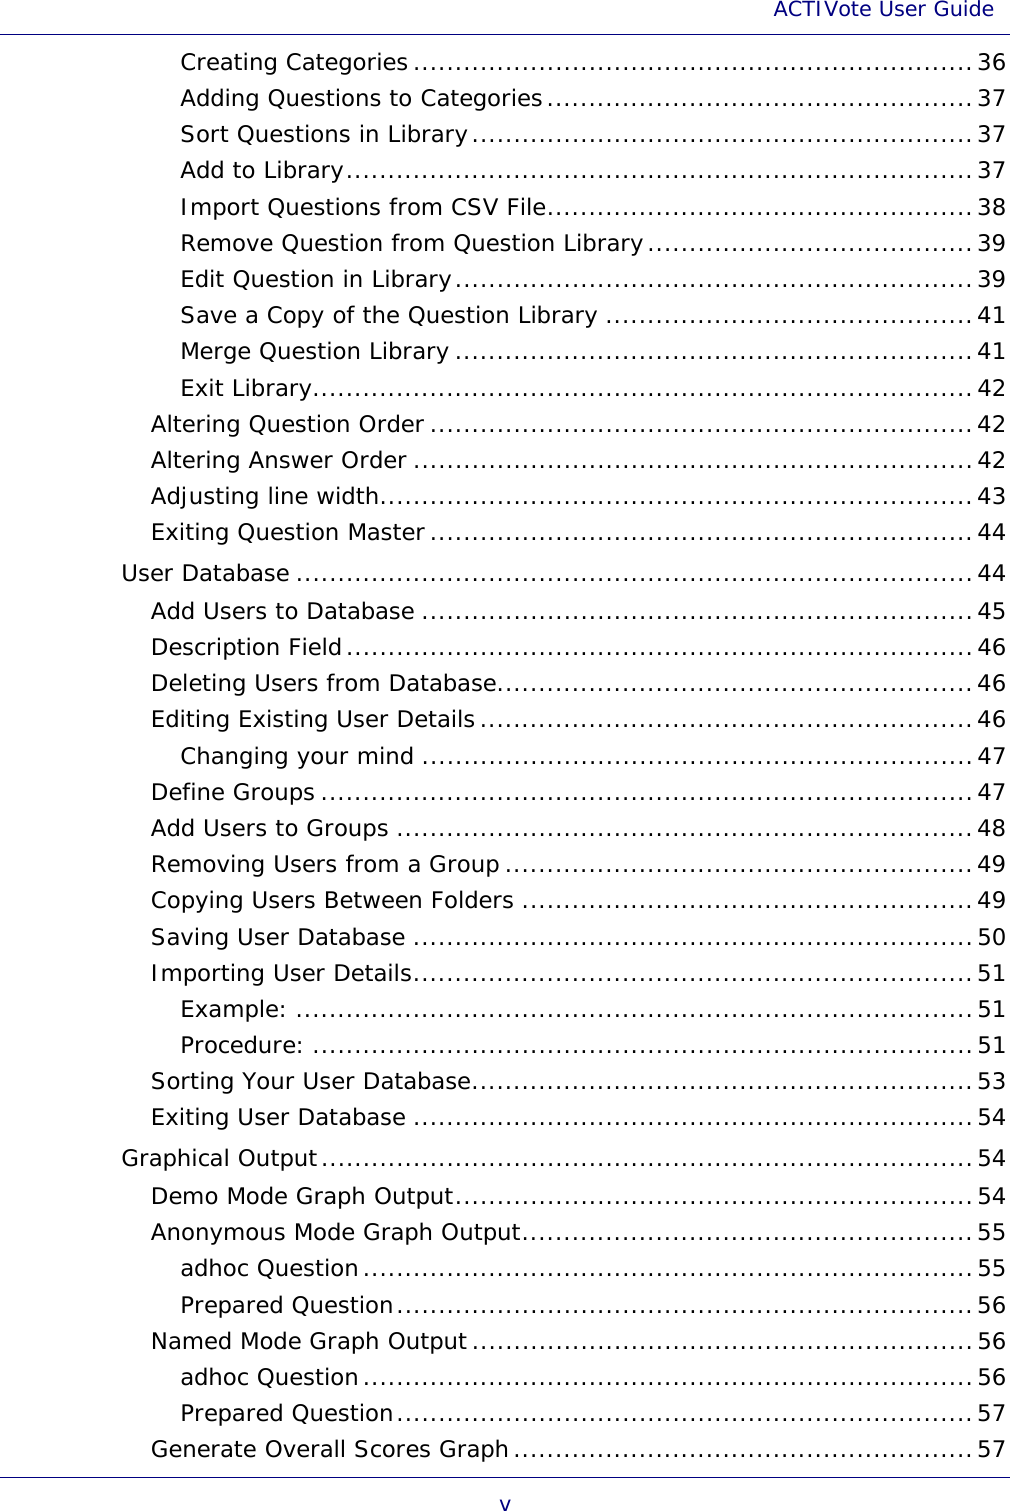 ACTIVote User Guide v Creating Categories ...................................................................36 Adding Questions to Categories...................................................37 Sort Questions in Library............................................................37 Add to Library...........................................................................37 Import Questions from CSV File...................................................38 Remove Question from Question Library.......................................39 Edit Question in Library..............................................................39 Save a Copy of the Question Library ............................................41 Merge Question Library ..............................................................41 Exit Library...............................................................................42 Altering Question Order .................................................................42 Altering Answer Order ...................................................................42 Adjusting line width.......................................................................43 Exiting Question Master .................................................................44 User Database .................................................................................44 Add Users to Database ..................................................................45 Description Field...........................................................................46 Deleting Users from Database.........................................................46 Editing Existing User Details ...........................................................46 Changing your mind ..................................................................47 Define Groups ..............................................................................47 Add Users to Groups .....................................................................48 Removing Users from a Group ........................................................49 Copying Users Between Folders ......................................................49 Saving User Database ...................................................................50 Importing User Details...................................................................51 Example: .................................................................................51 Procedure: ...............................................................................51 Sorting Your User Database............................................................53 Exiting User Database ...................................................................54 Graphical Output..............................................................................54 Demo Mode Graph Output..............................................................54 Anonymous Mode Graph Output......................................................55 adhoc Question.........................................................................55 Prepared Question.....................................................................56 Named Mode Graph Output............................................................56 adhoc Question.........................................................................56 Prepared Question.....................................................................57 Generate Overall Scores Graph.......................................................57 